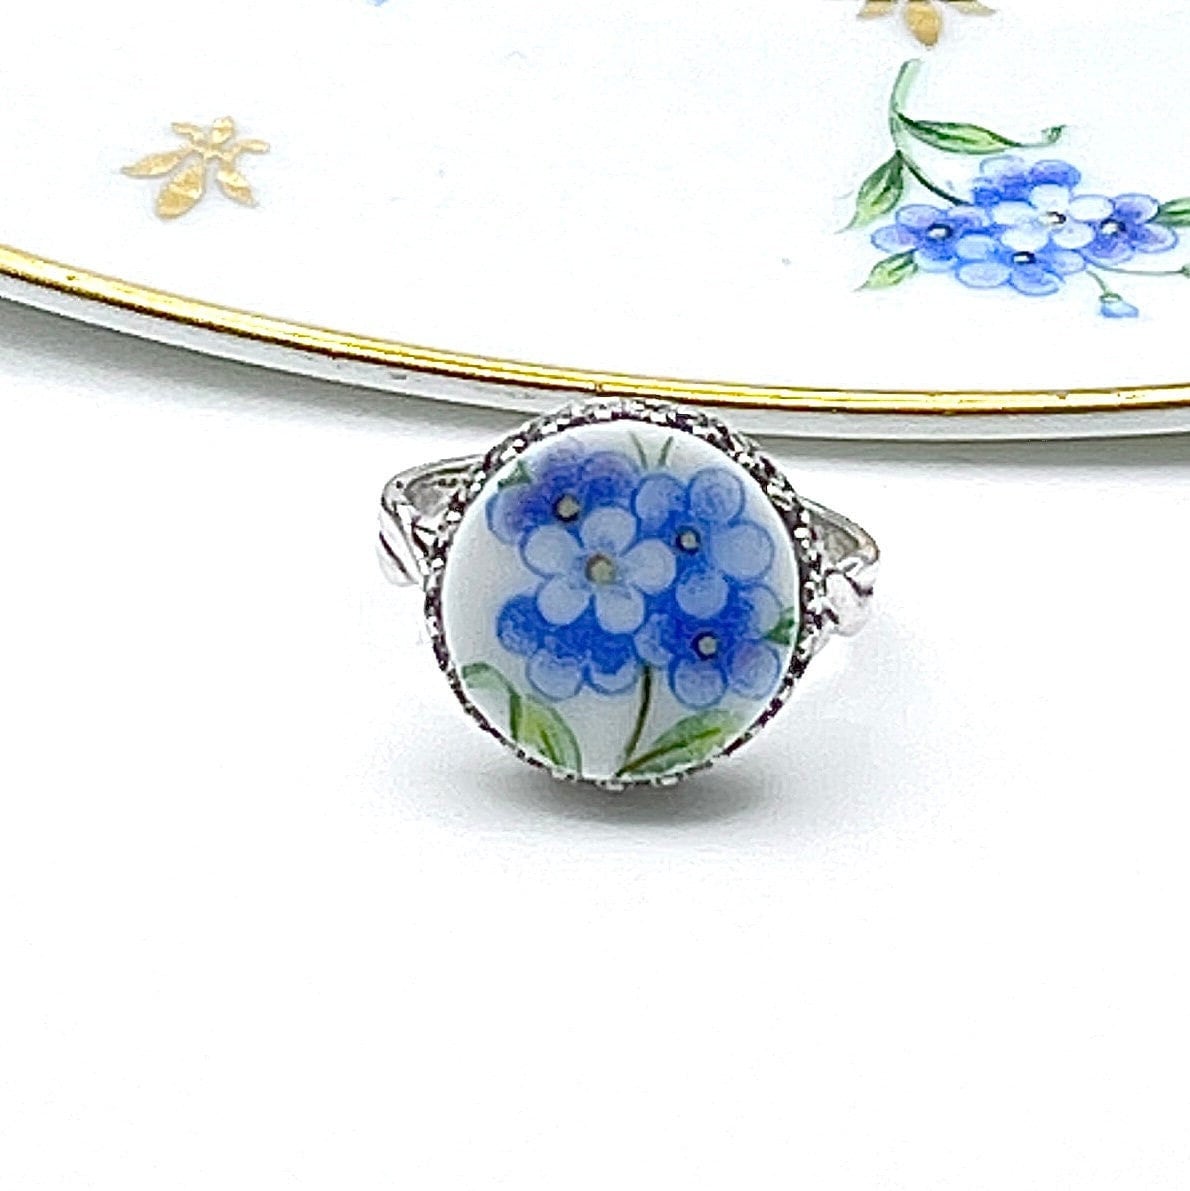 Adjustable Sterling Silver Flower Ring, Forget Me Not Broken China Jewelry,  Gifts for Women,